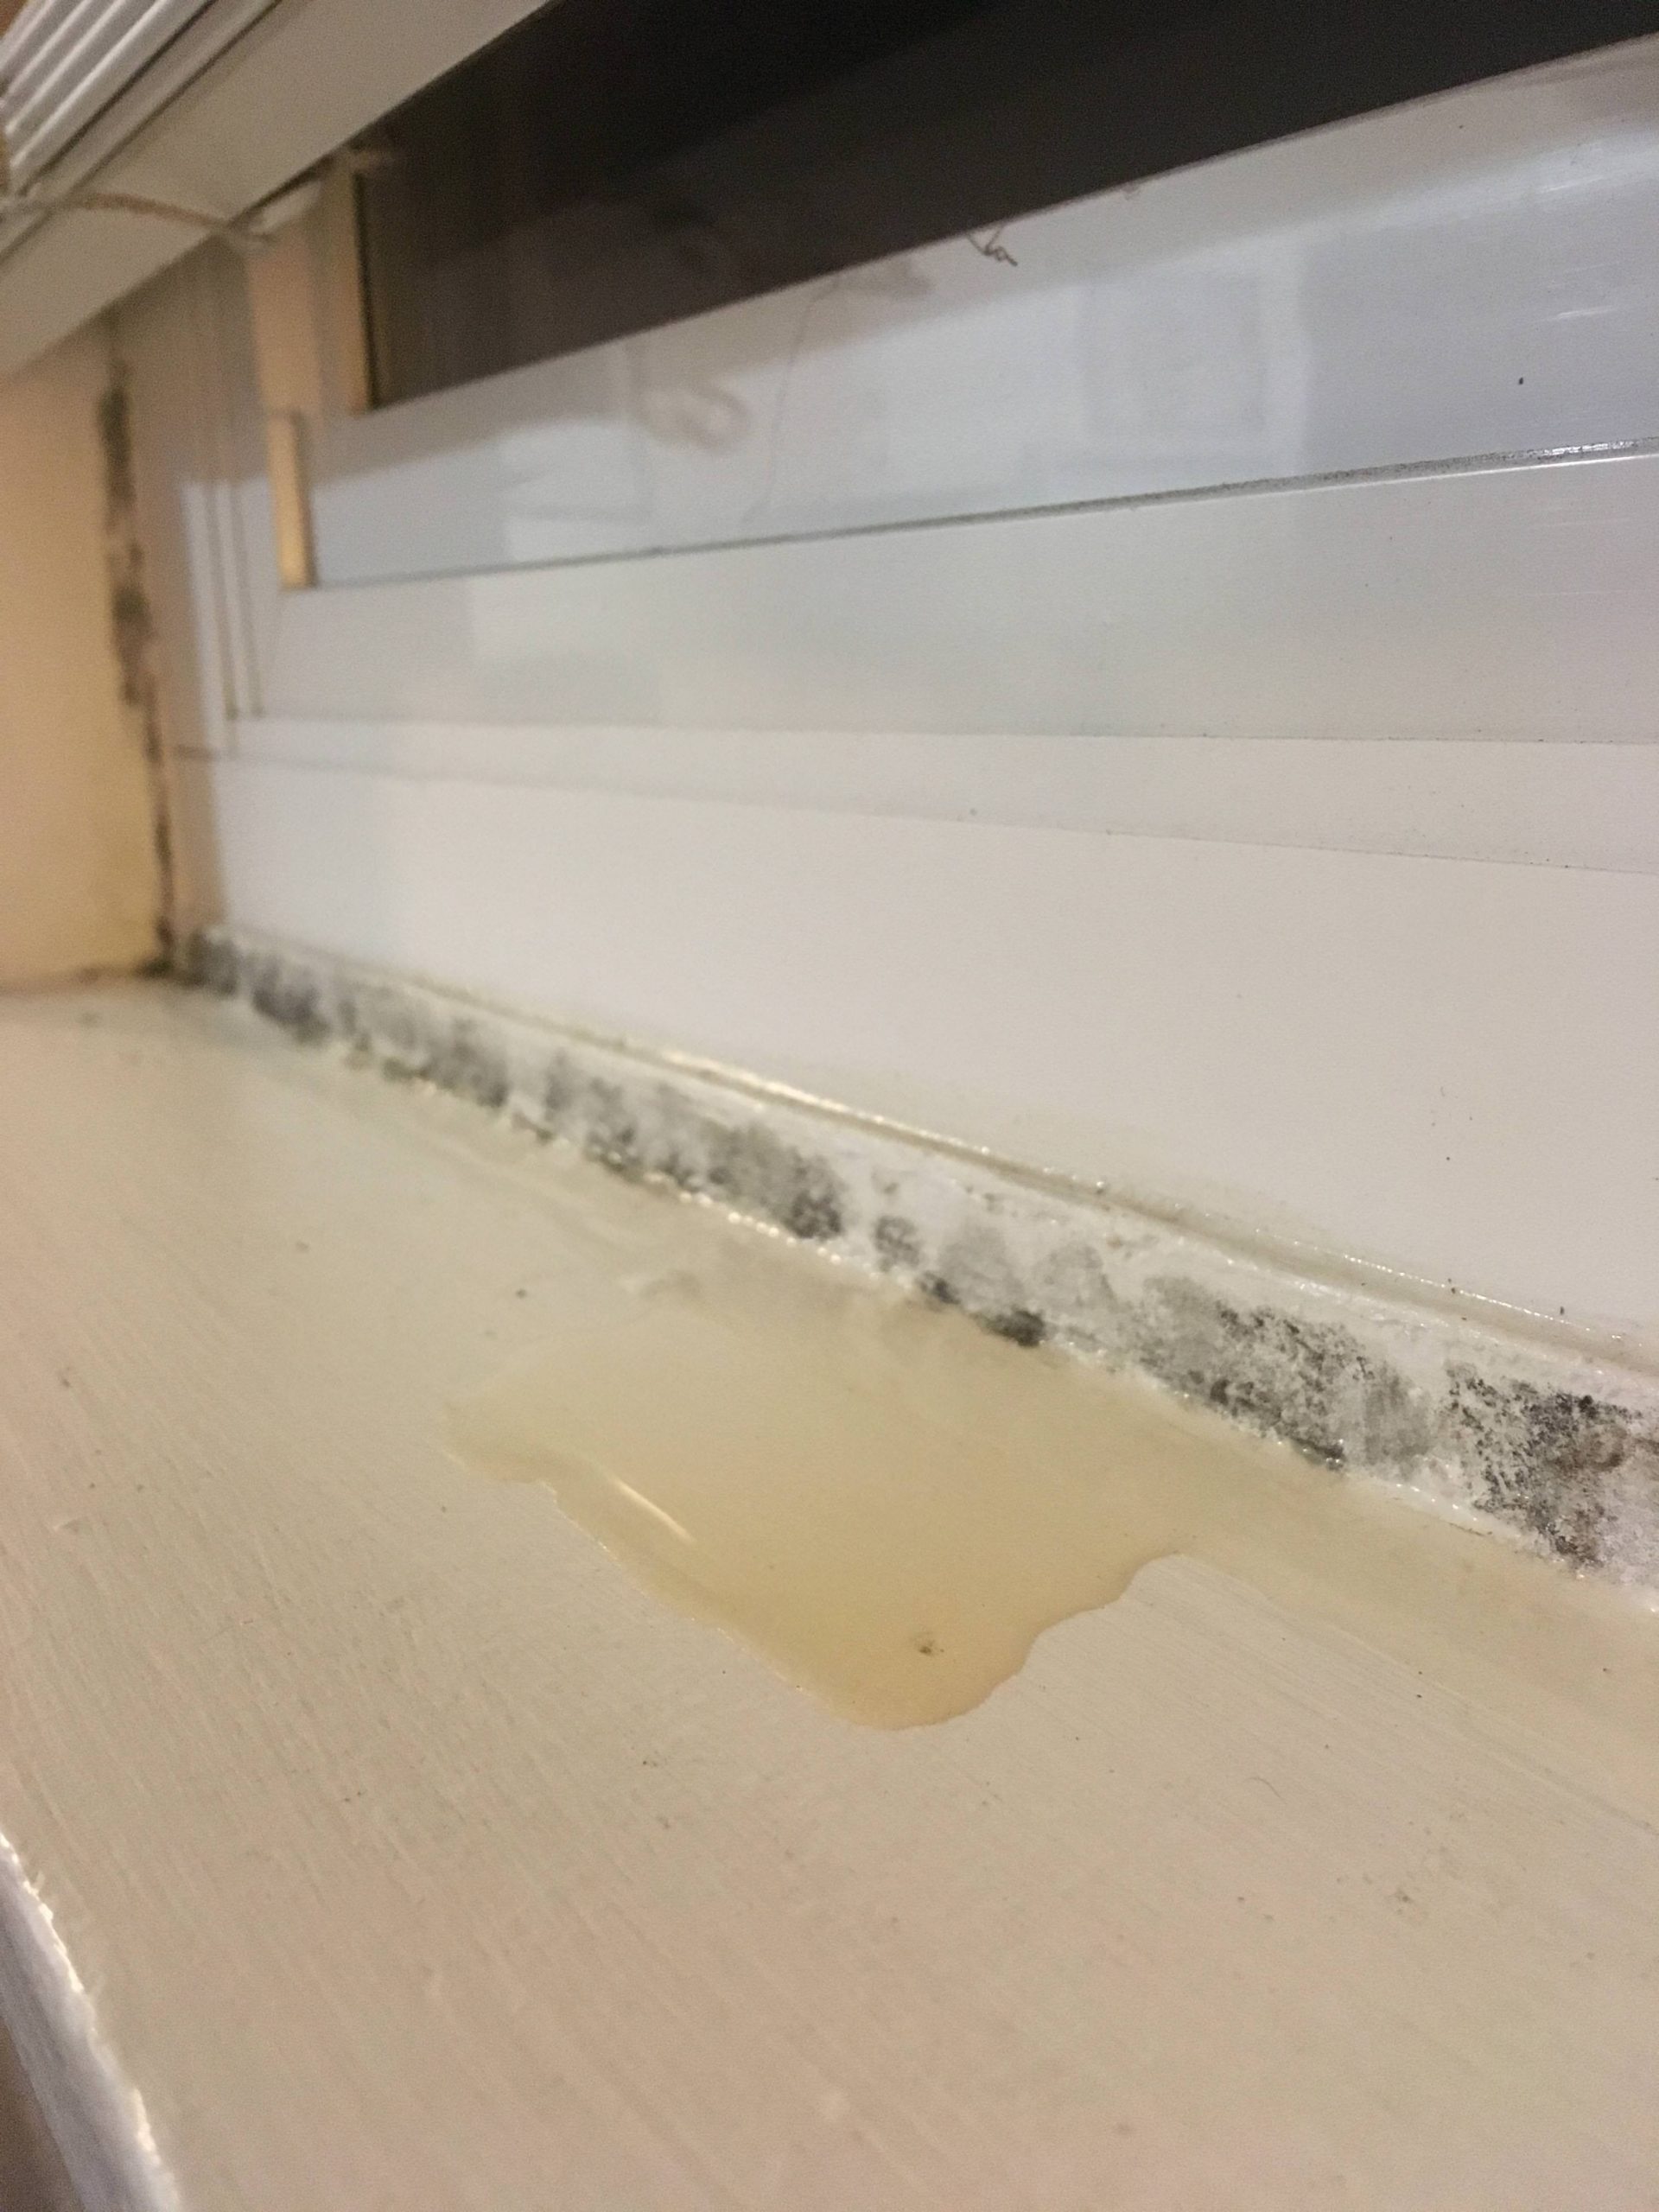 How do I take care of this mold in my apartment? : askportland